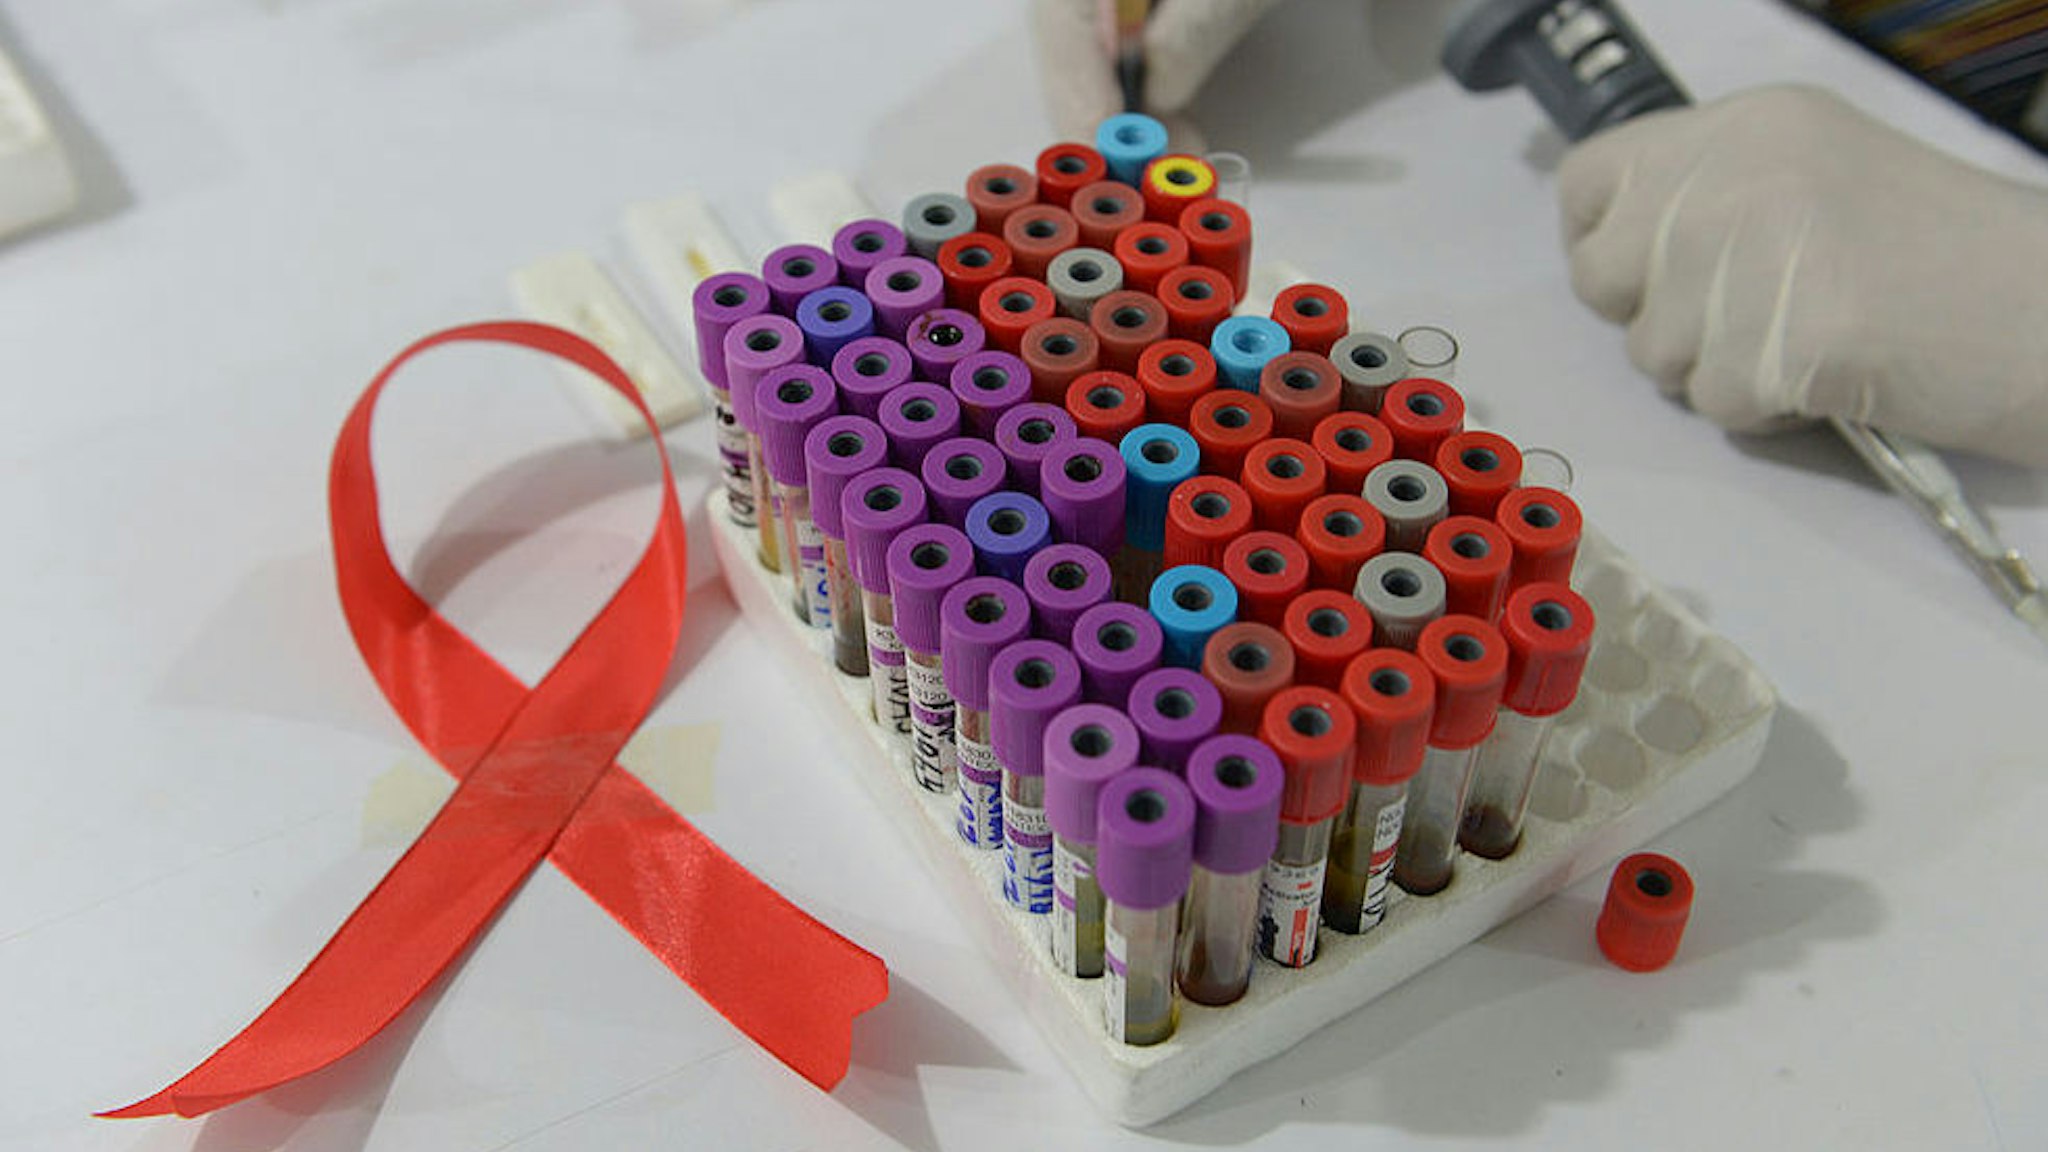 A Pakistani technician takes samples in a laboratory alongside a ribbon promoting the forthcoming World Aids Day in Islamabad on November 30, 2013.